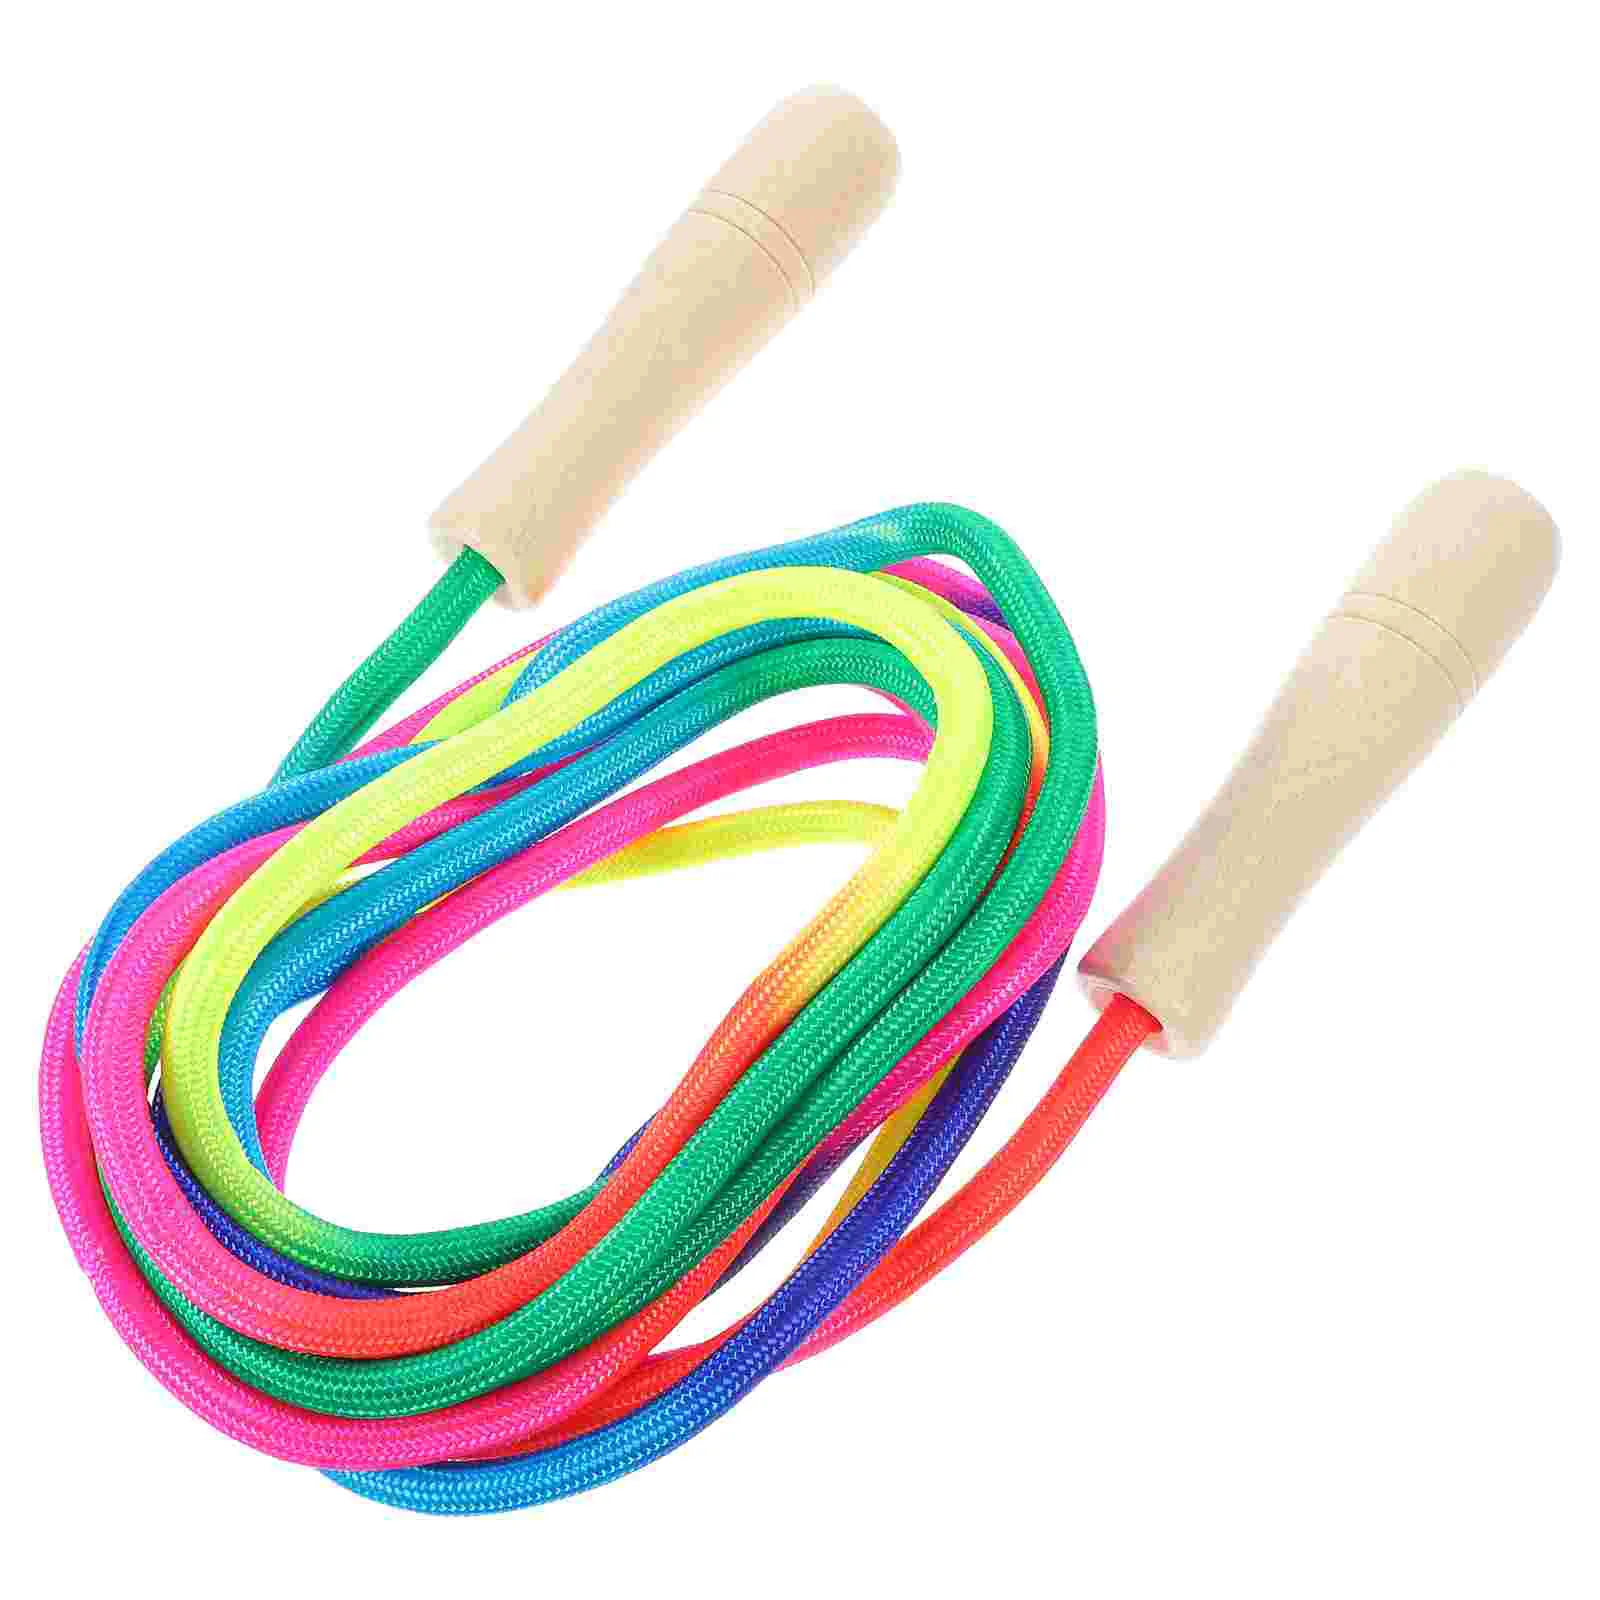 

Sports Multiplayer Skipping Rope Pupils Chinese Jump Kids Jumping Device Tools Beech Fitness Outdoor